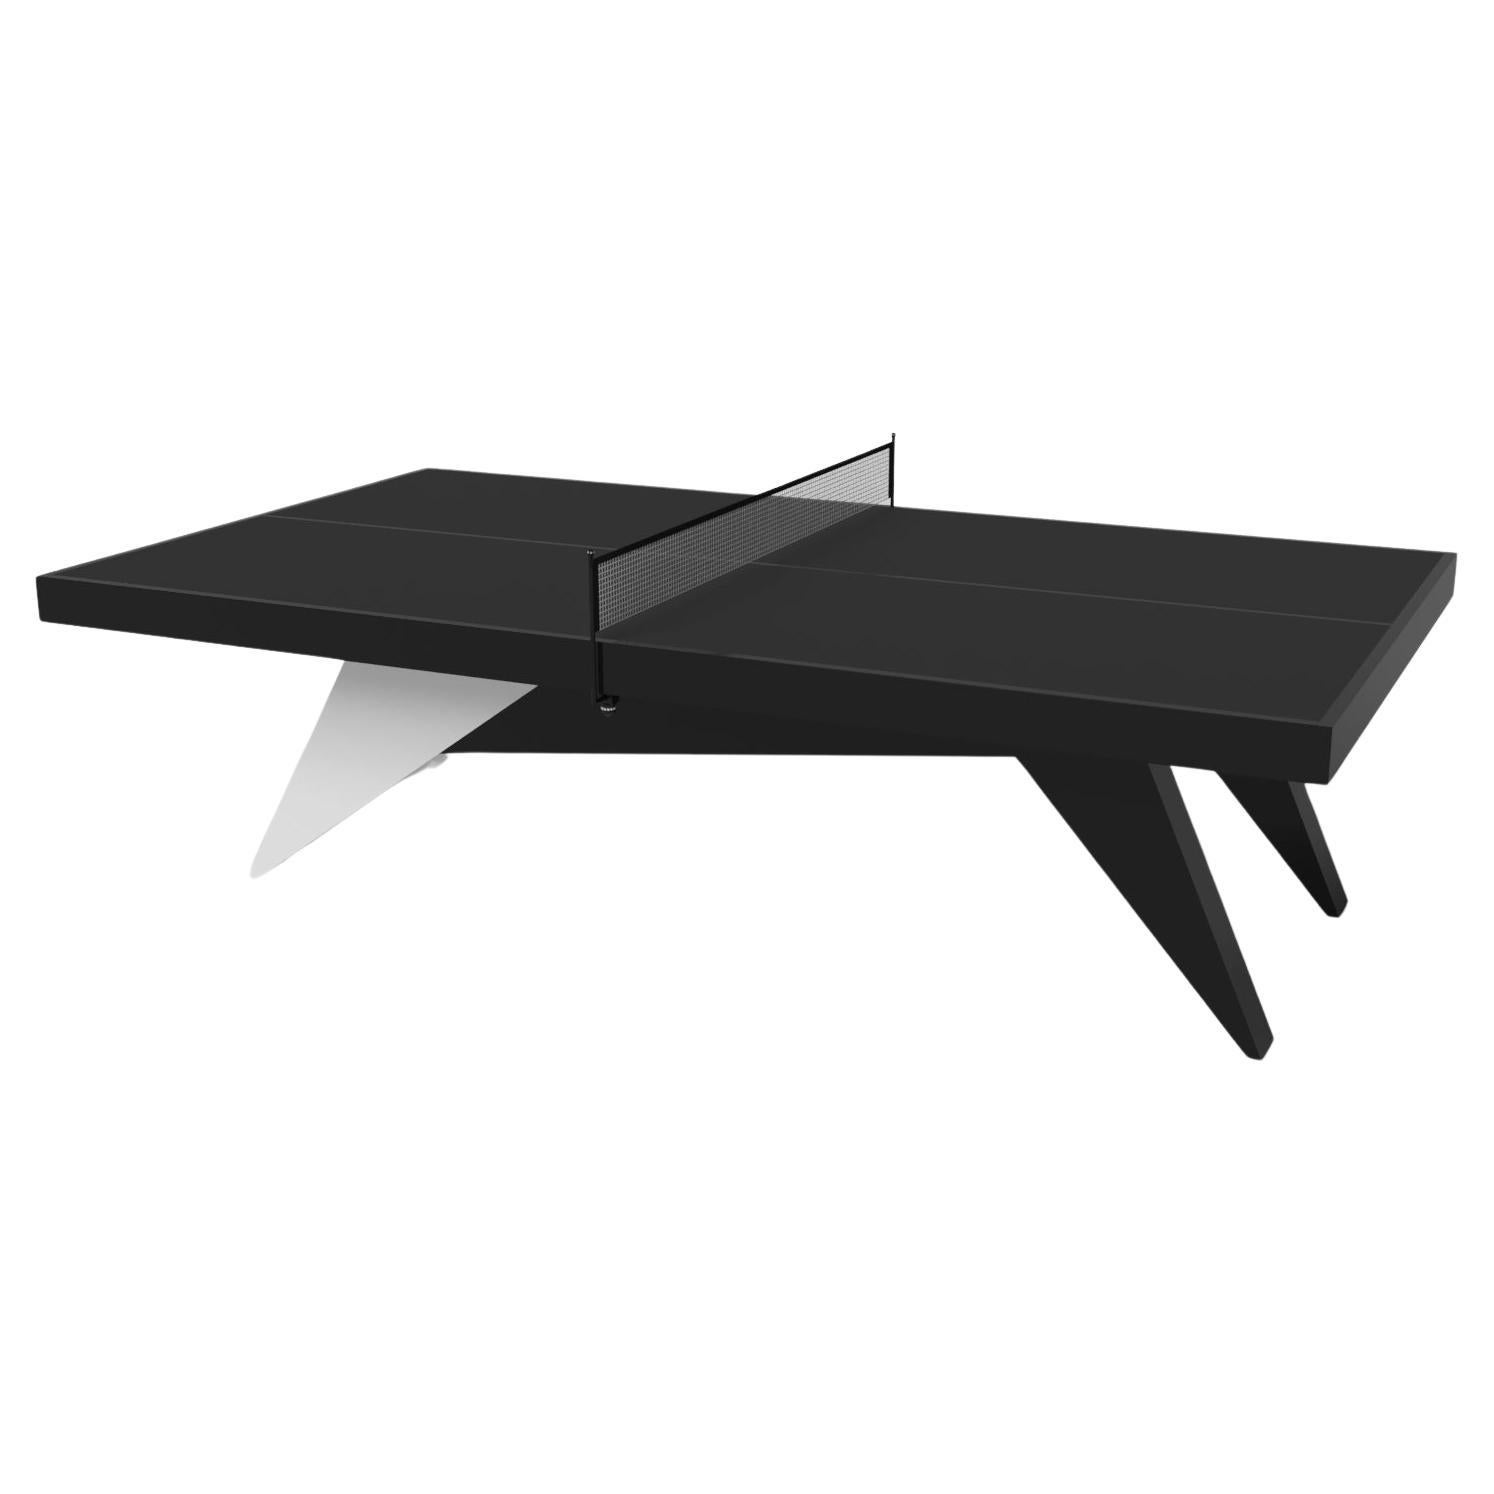 Elevate Customs Mantis Tennis Table / Solid Pantone Black in 9' - Made in USA For Sale